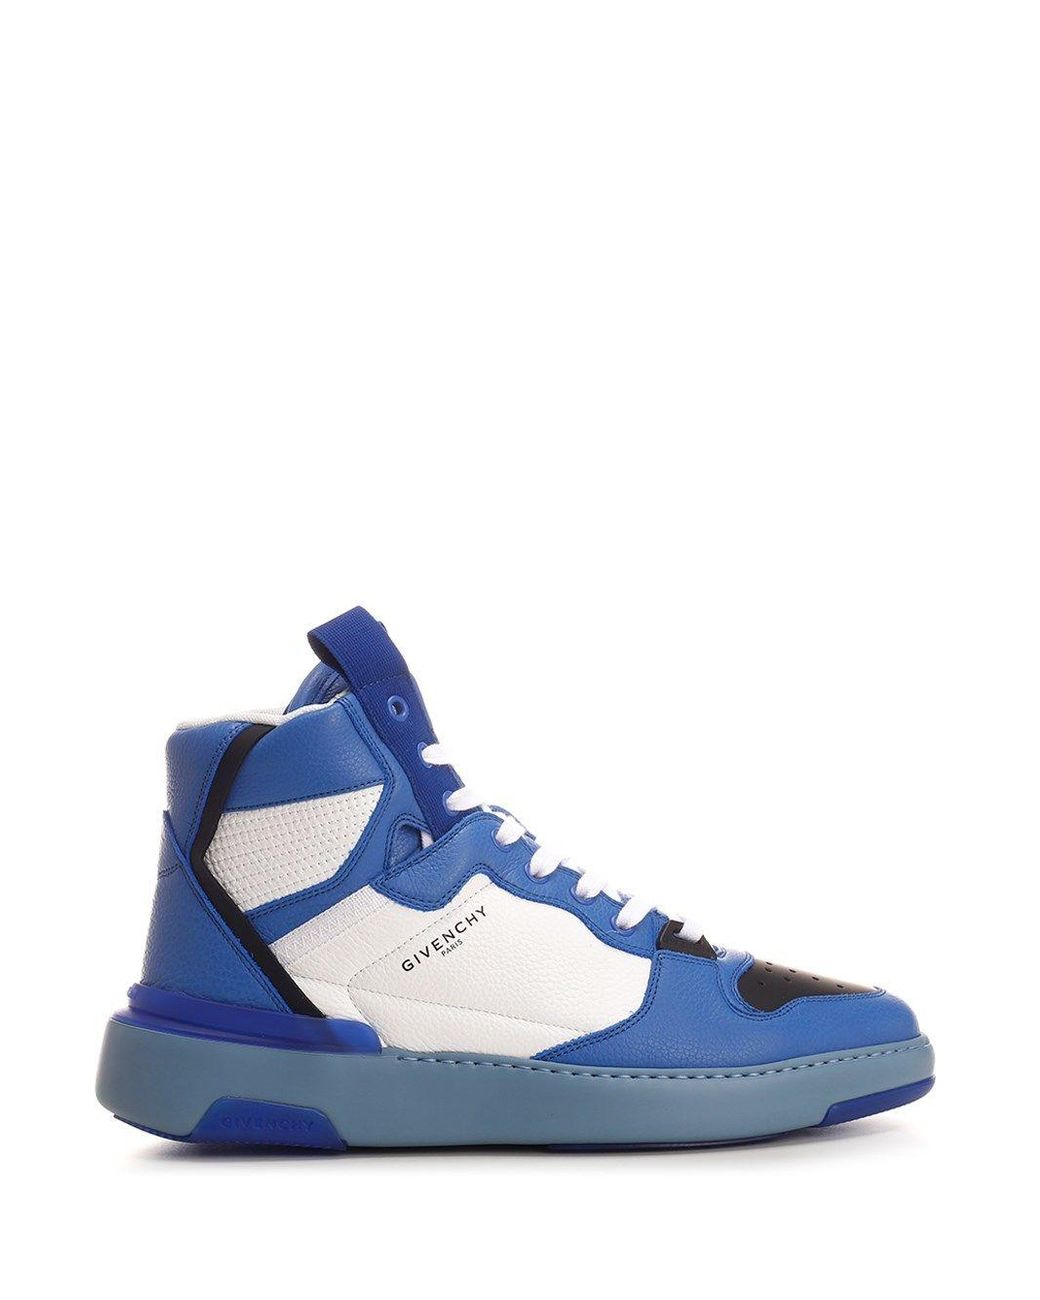 Givenchy Leather Other Materials Sneakers in Blue for Men - Lyst